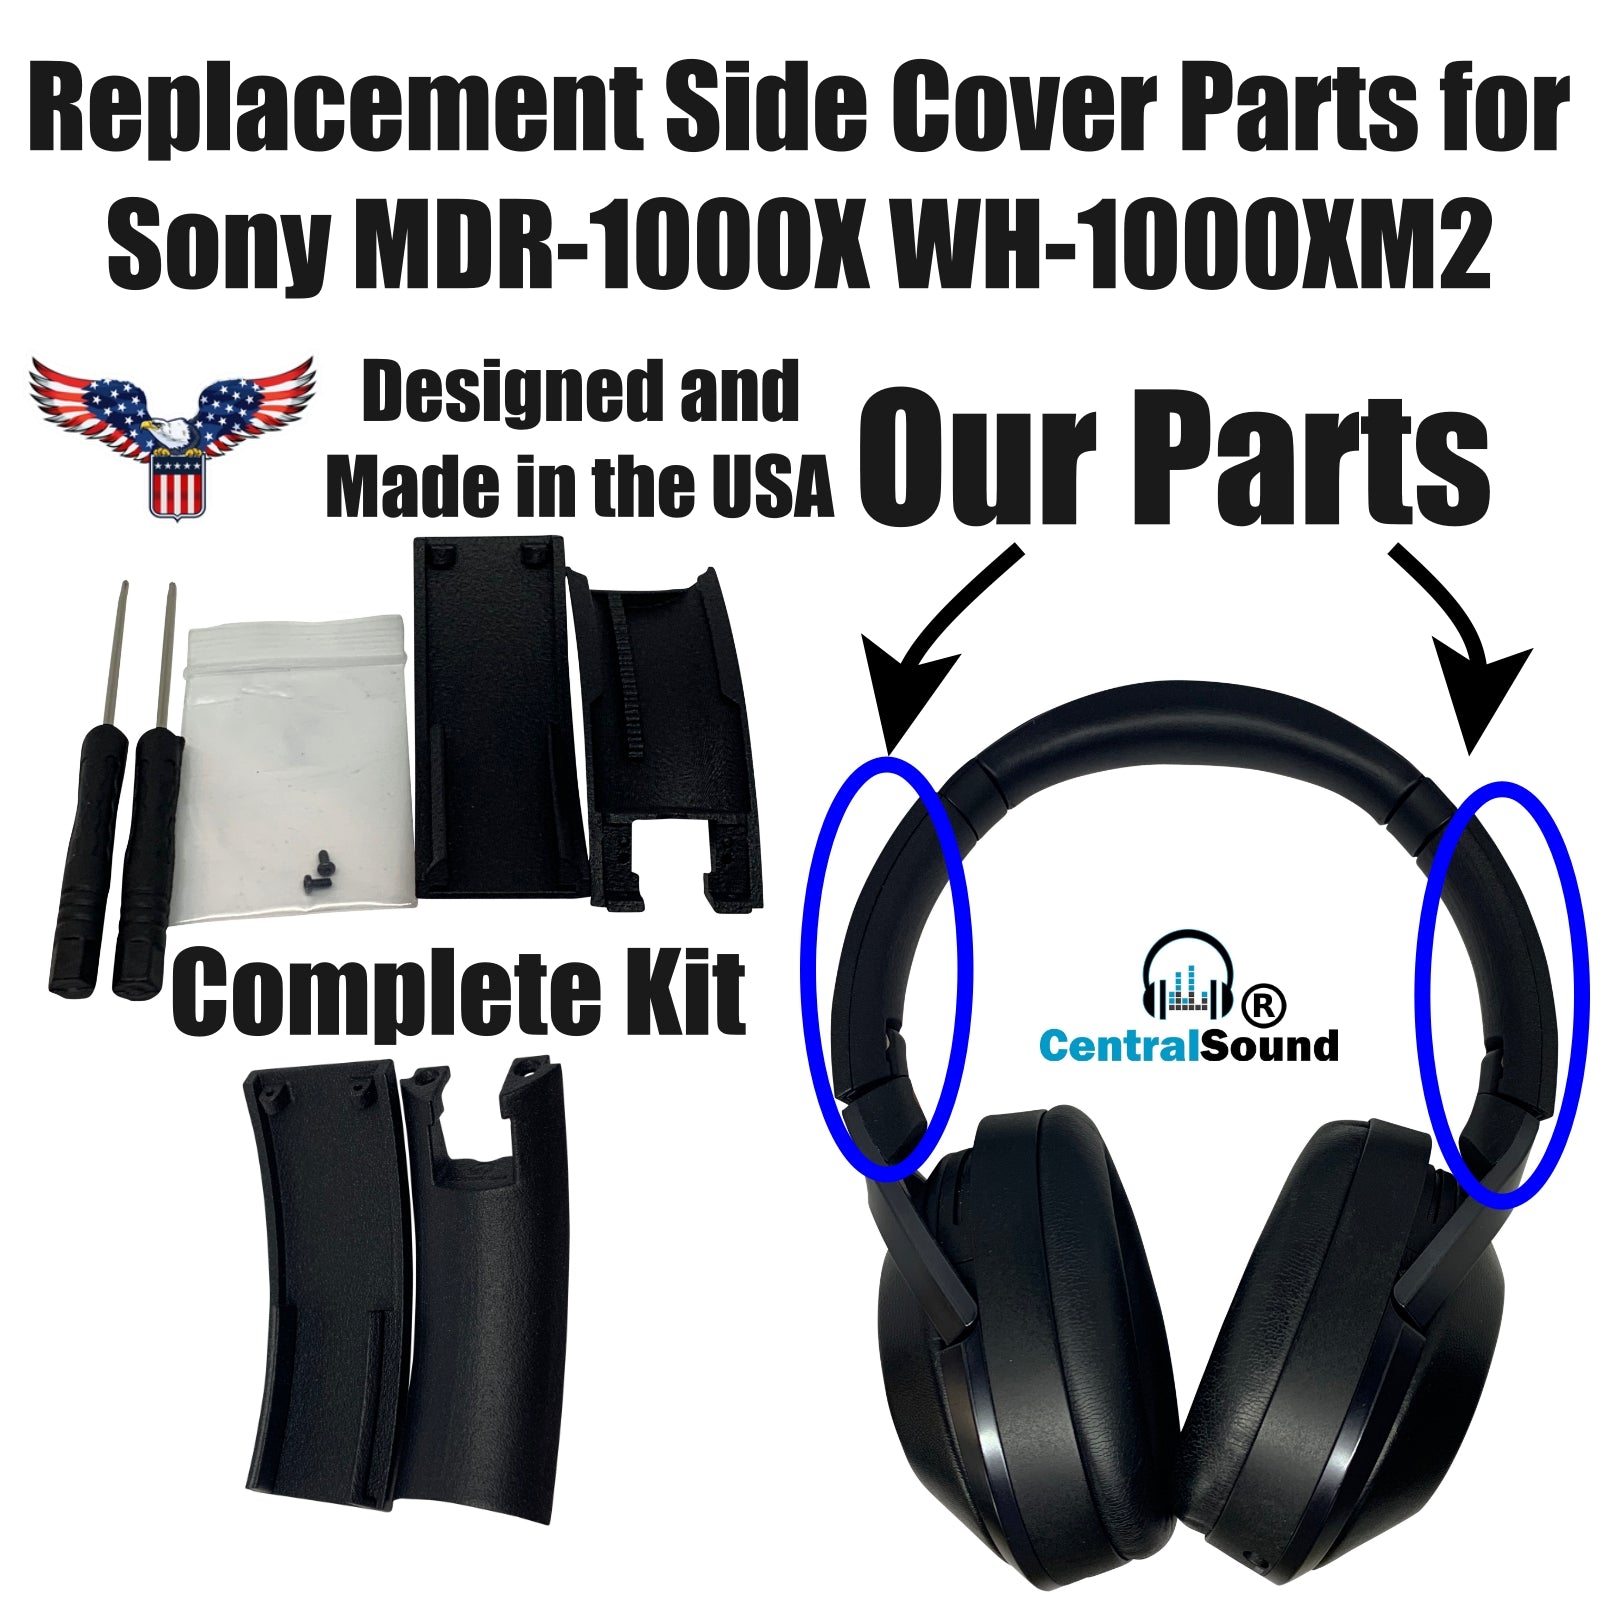 Replacement Side Cover Slider Part for Sony MDR-1000X WH-1000XM2